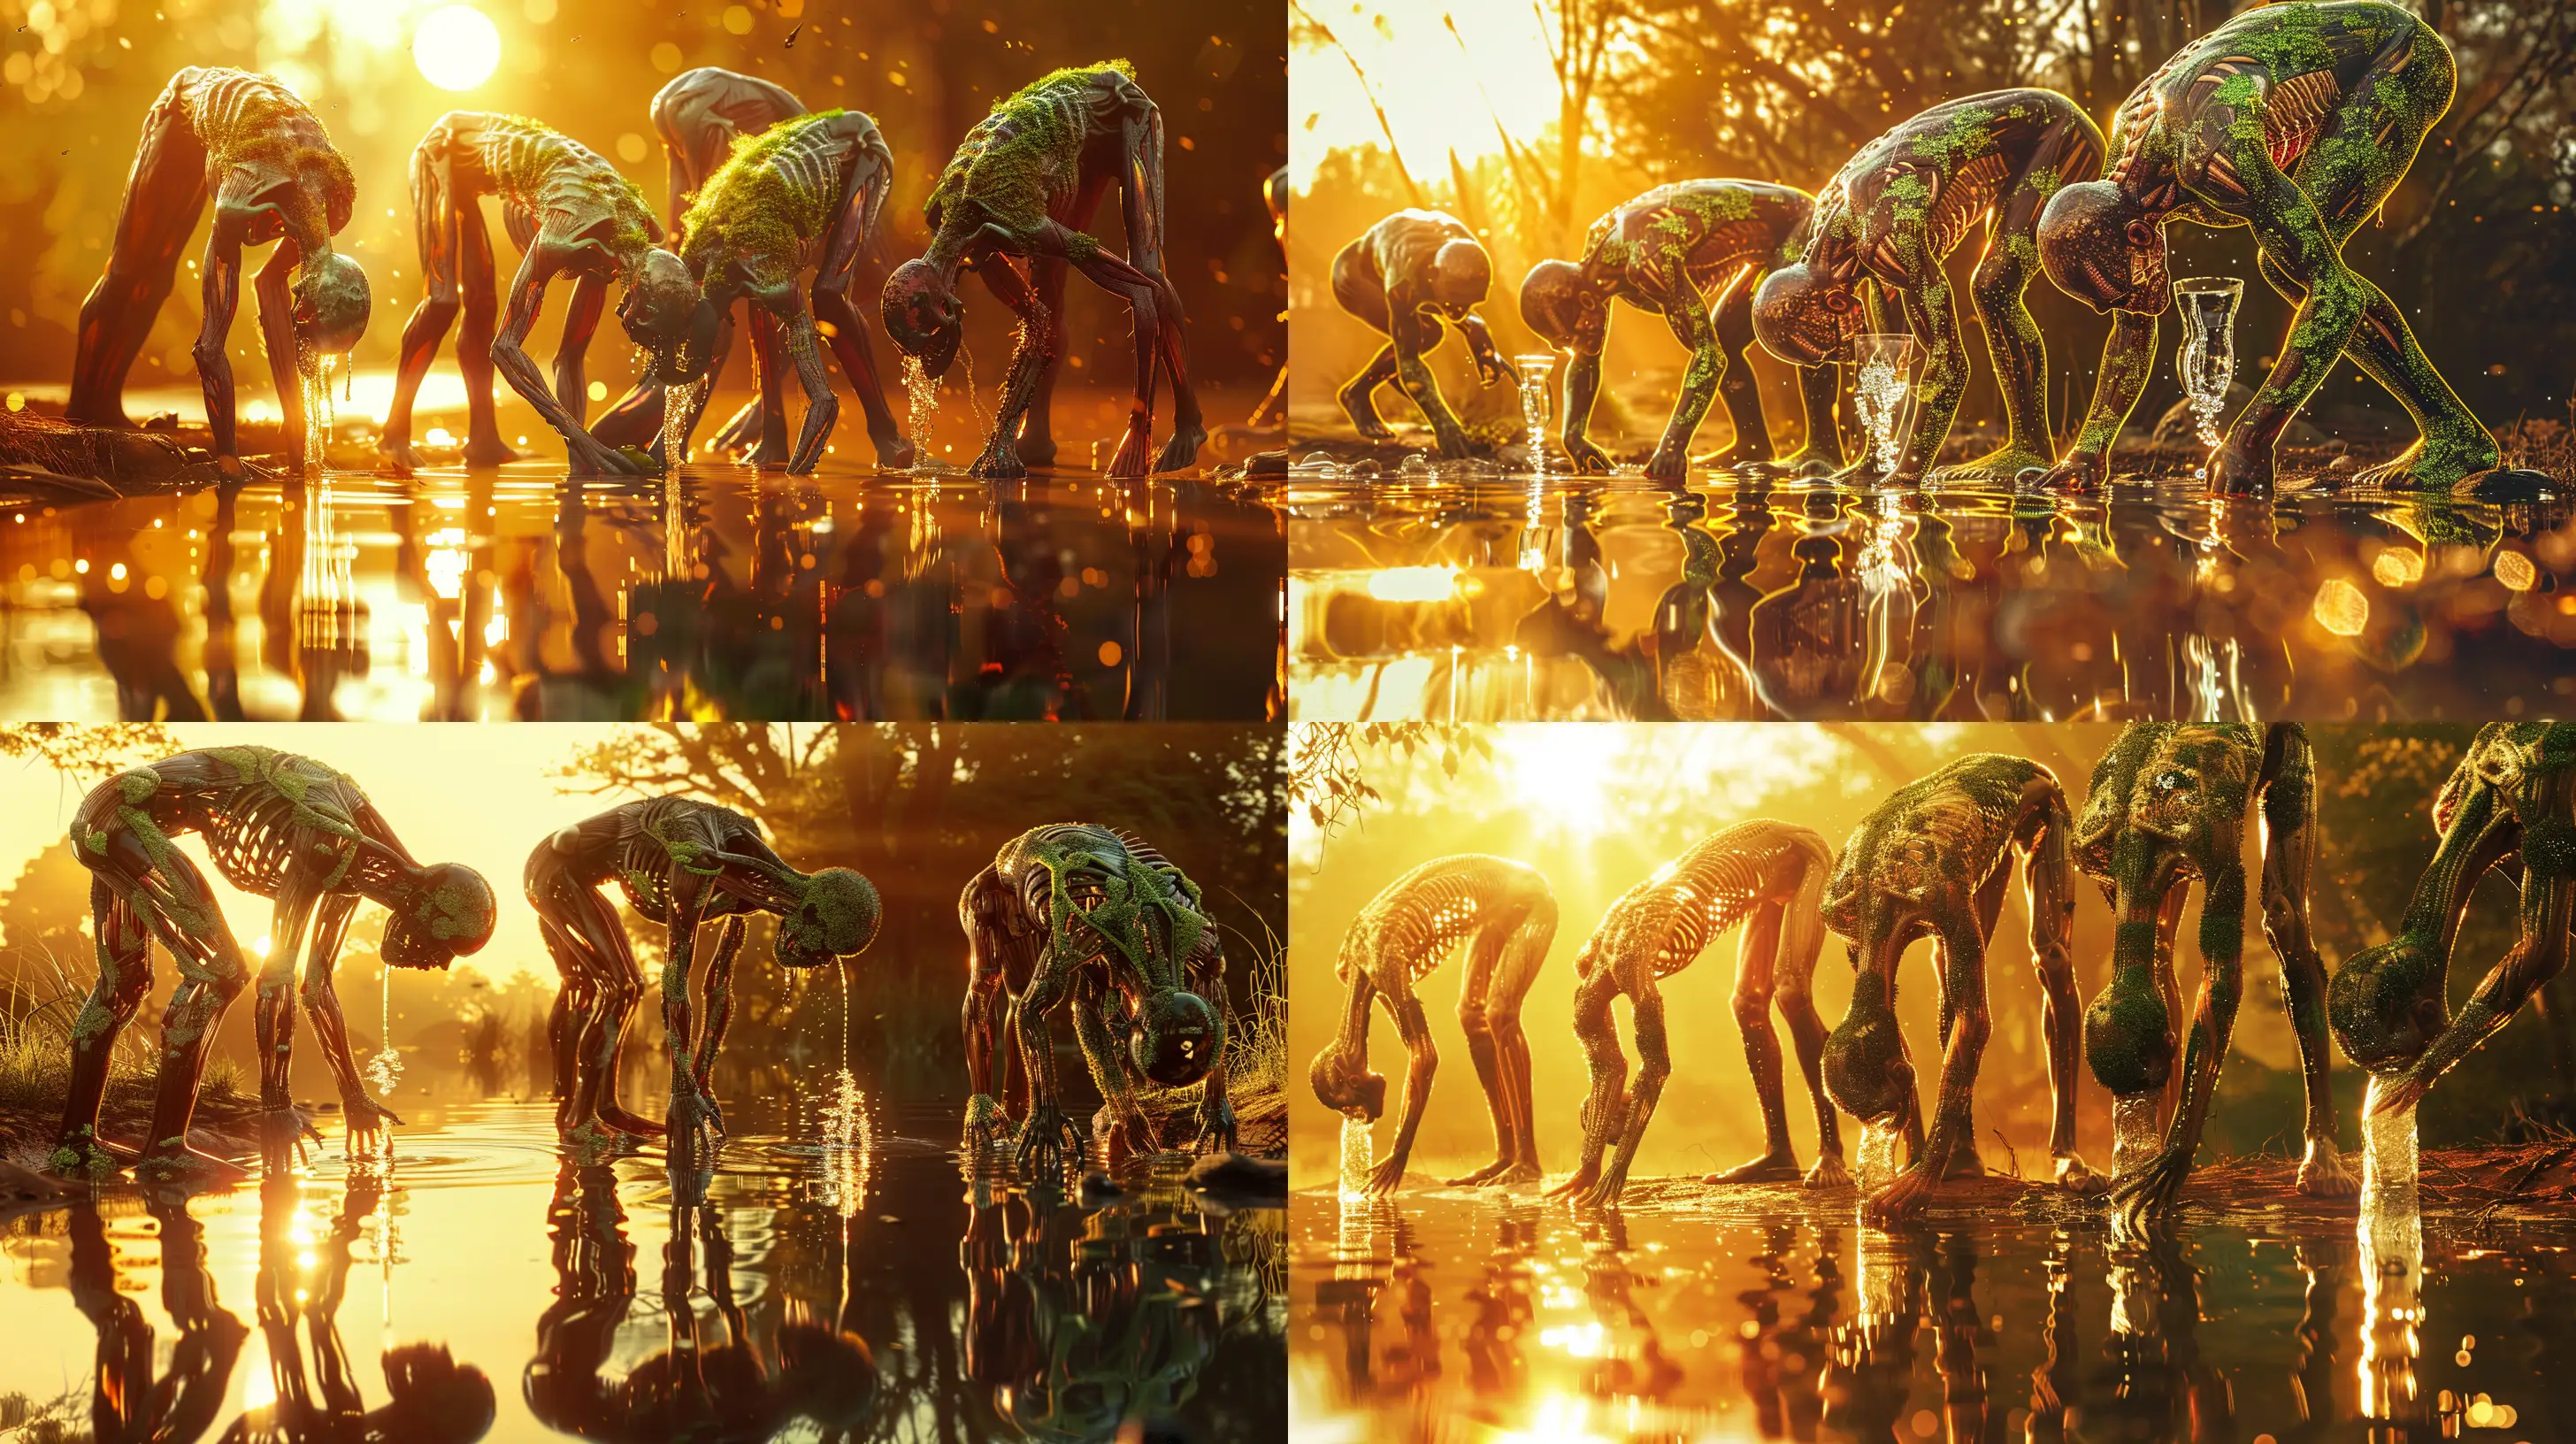 Translucent-Tribe-Members-Drinking-Water-at-Sunset-Pond